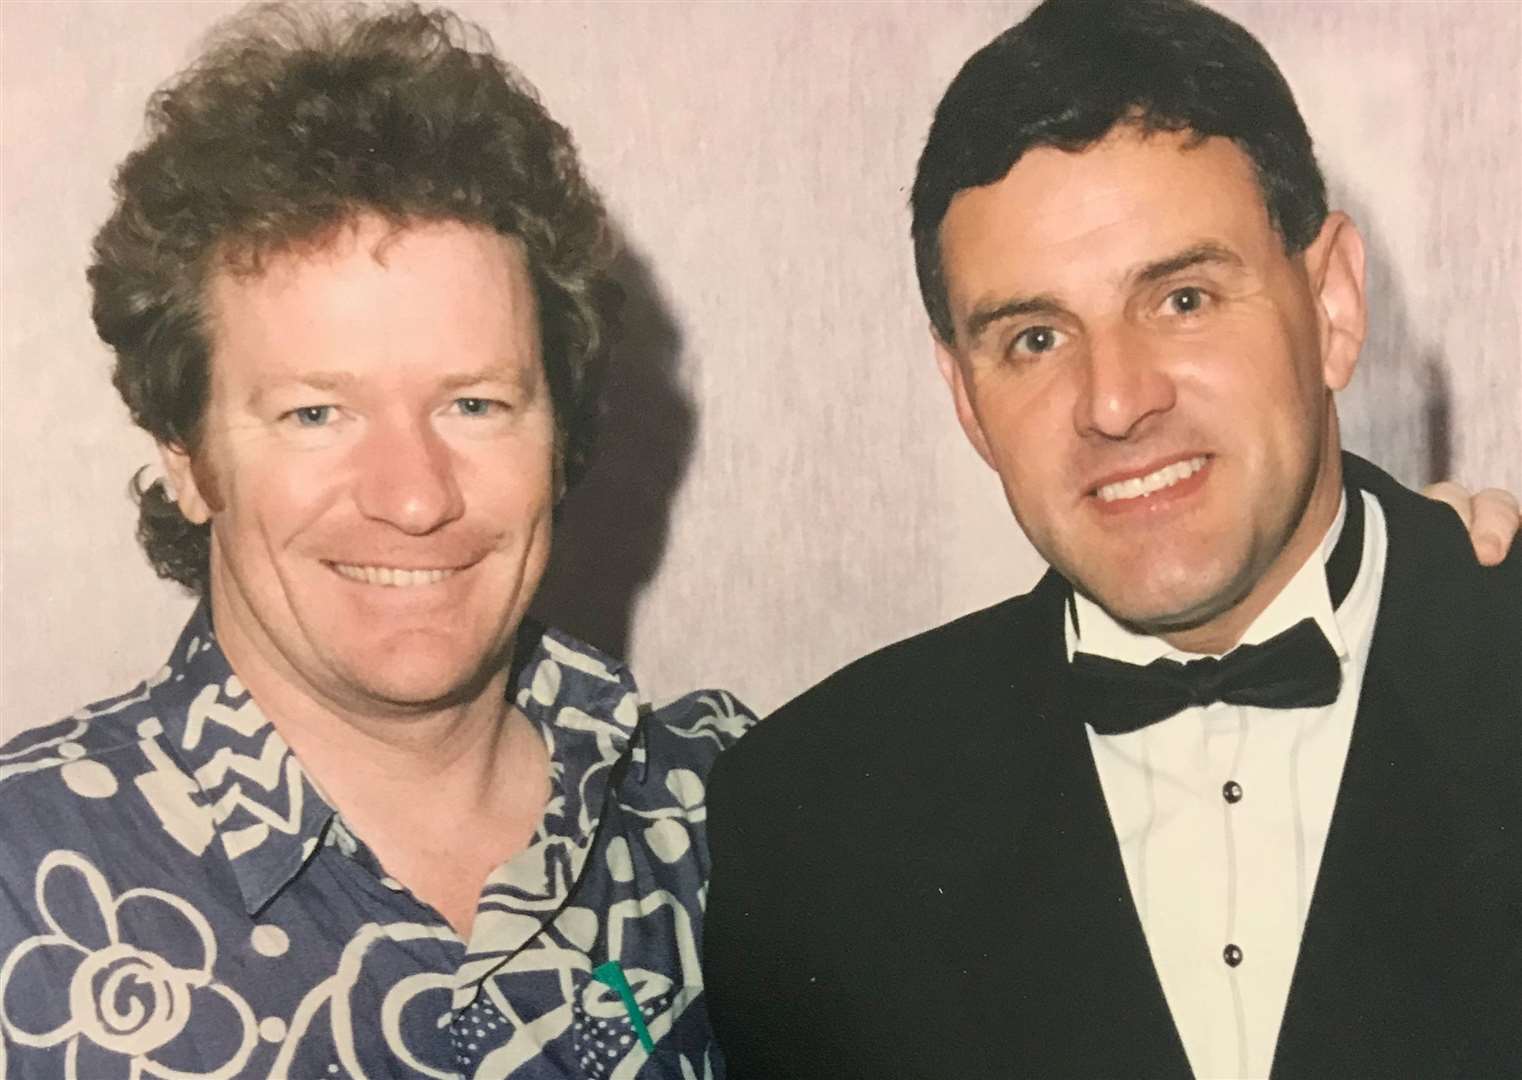 Former Victoria’s boss Ray Radmore photographed with Jim Davidson when he appeared at the club